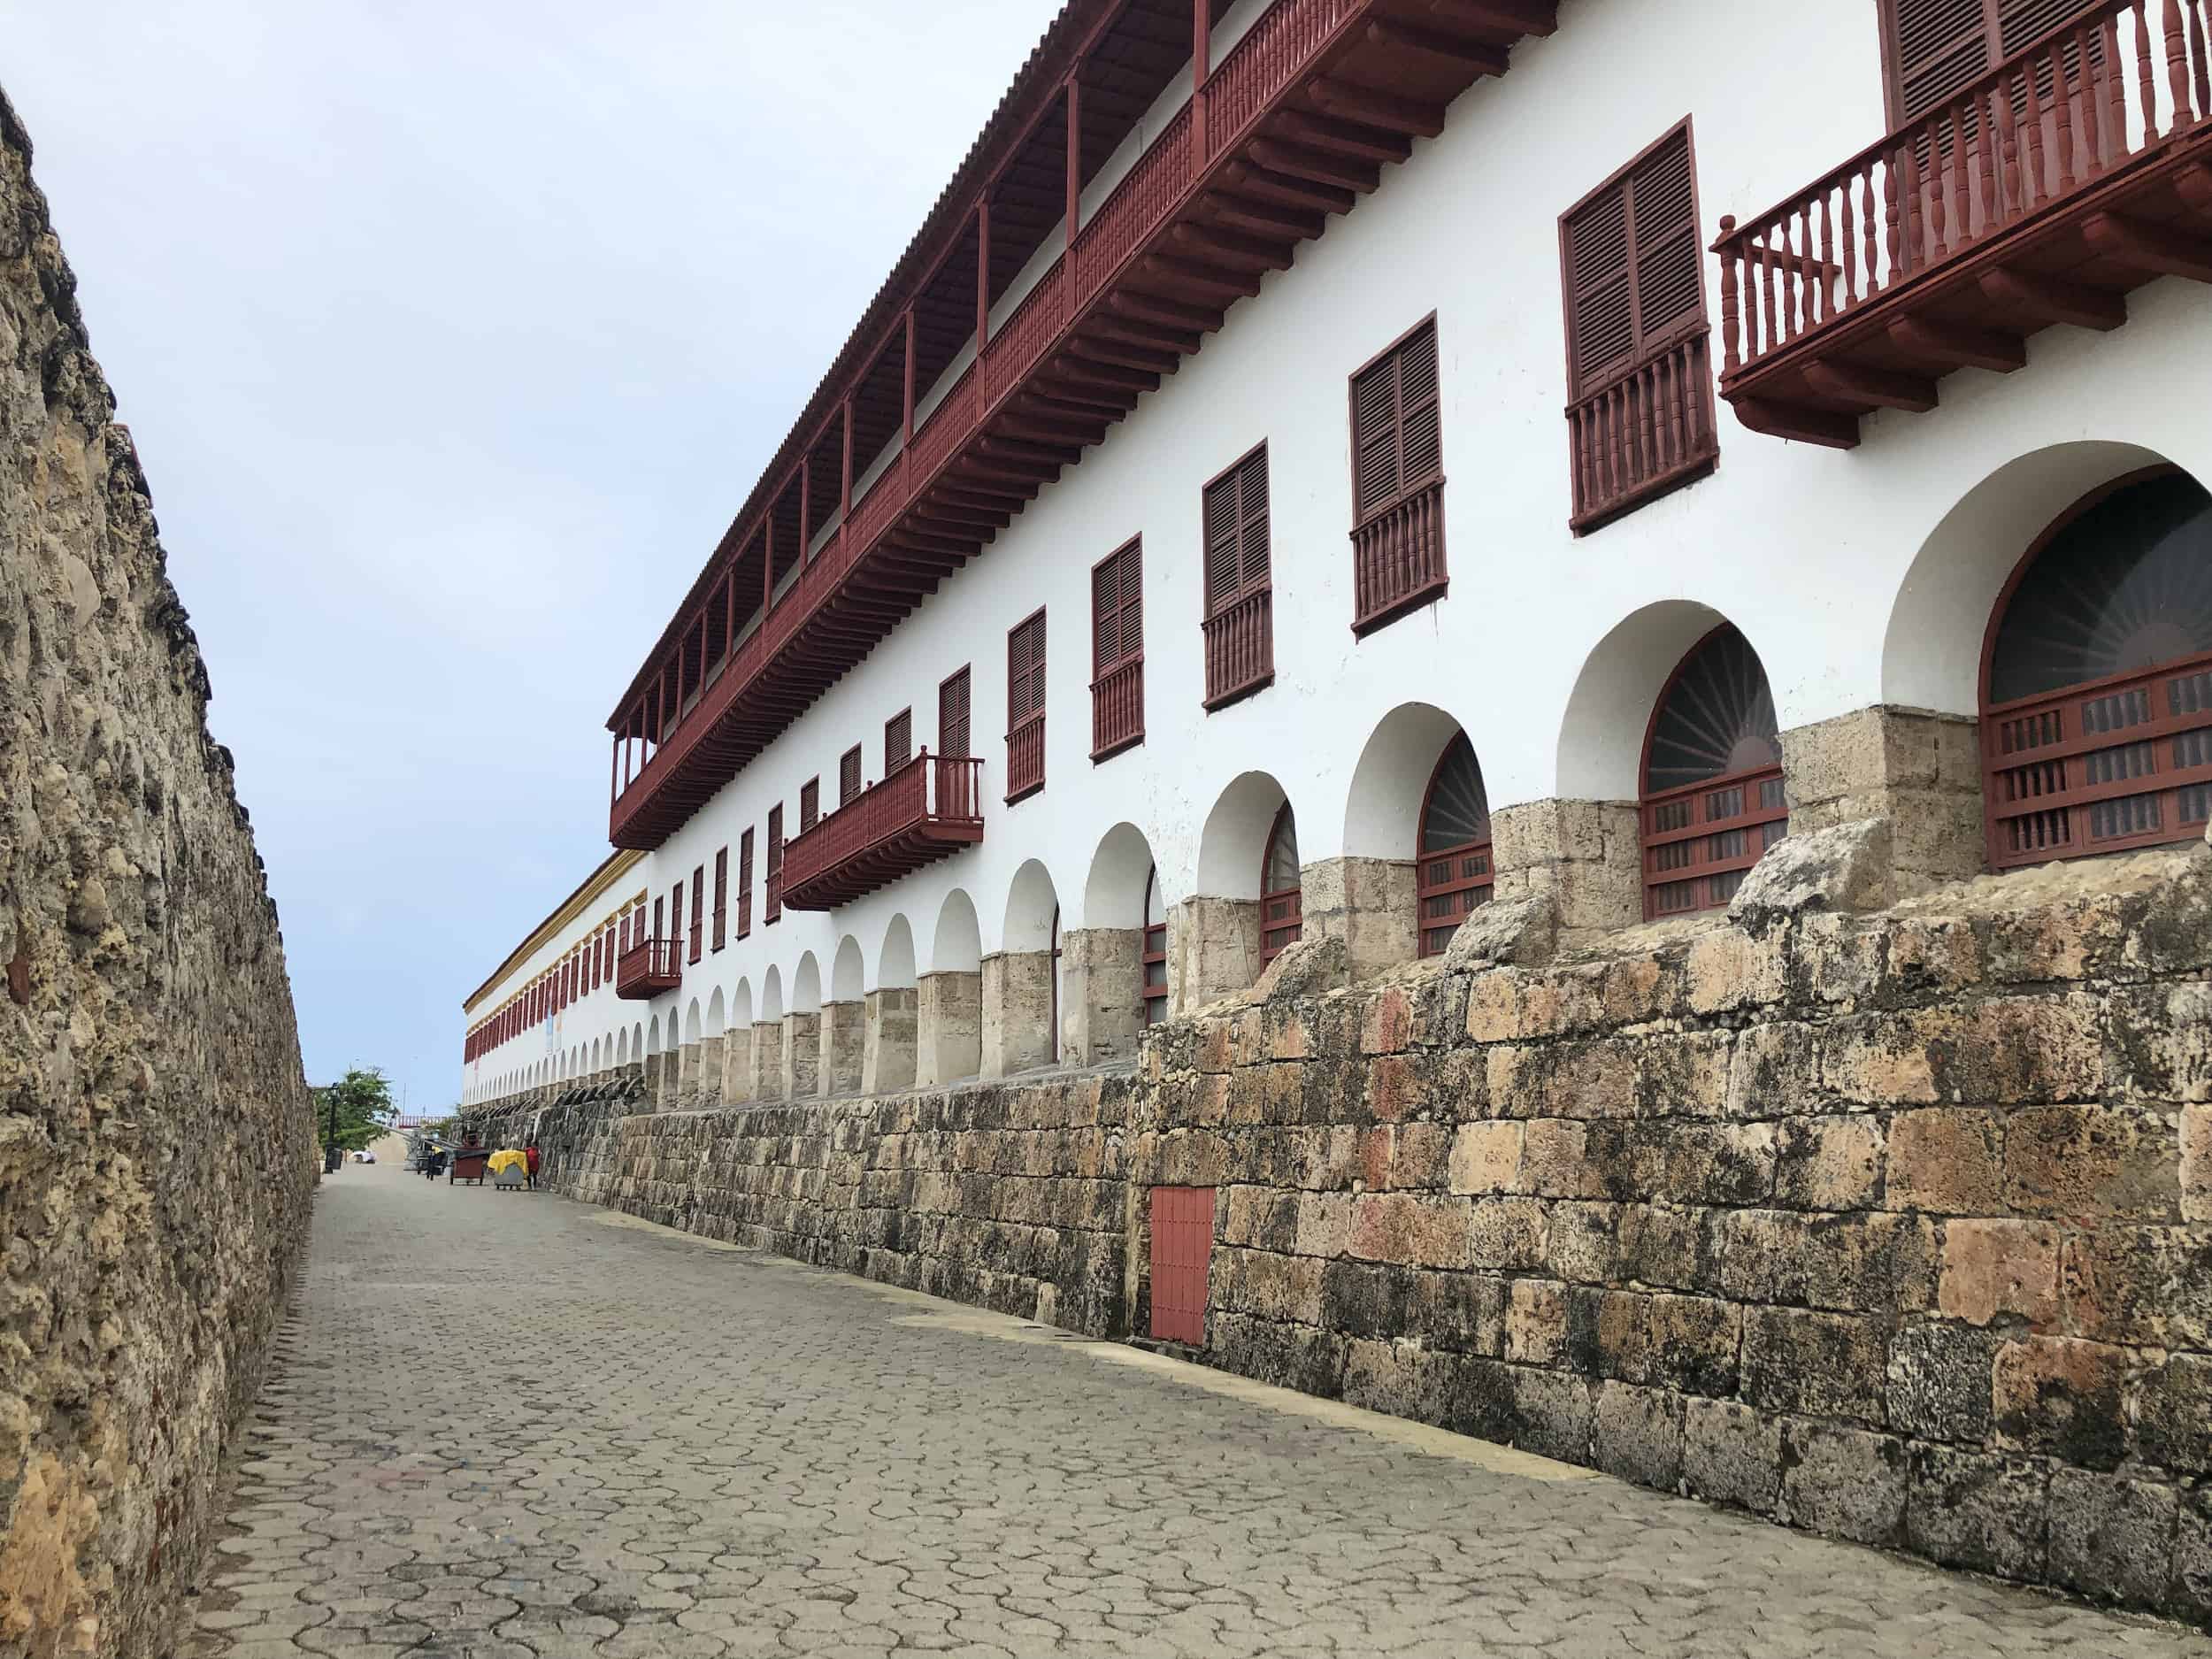 Caribbean Naval Museum in Cartagena, Colombia